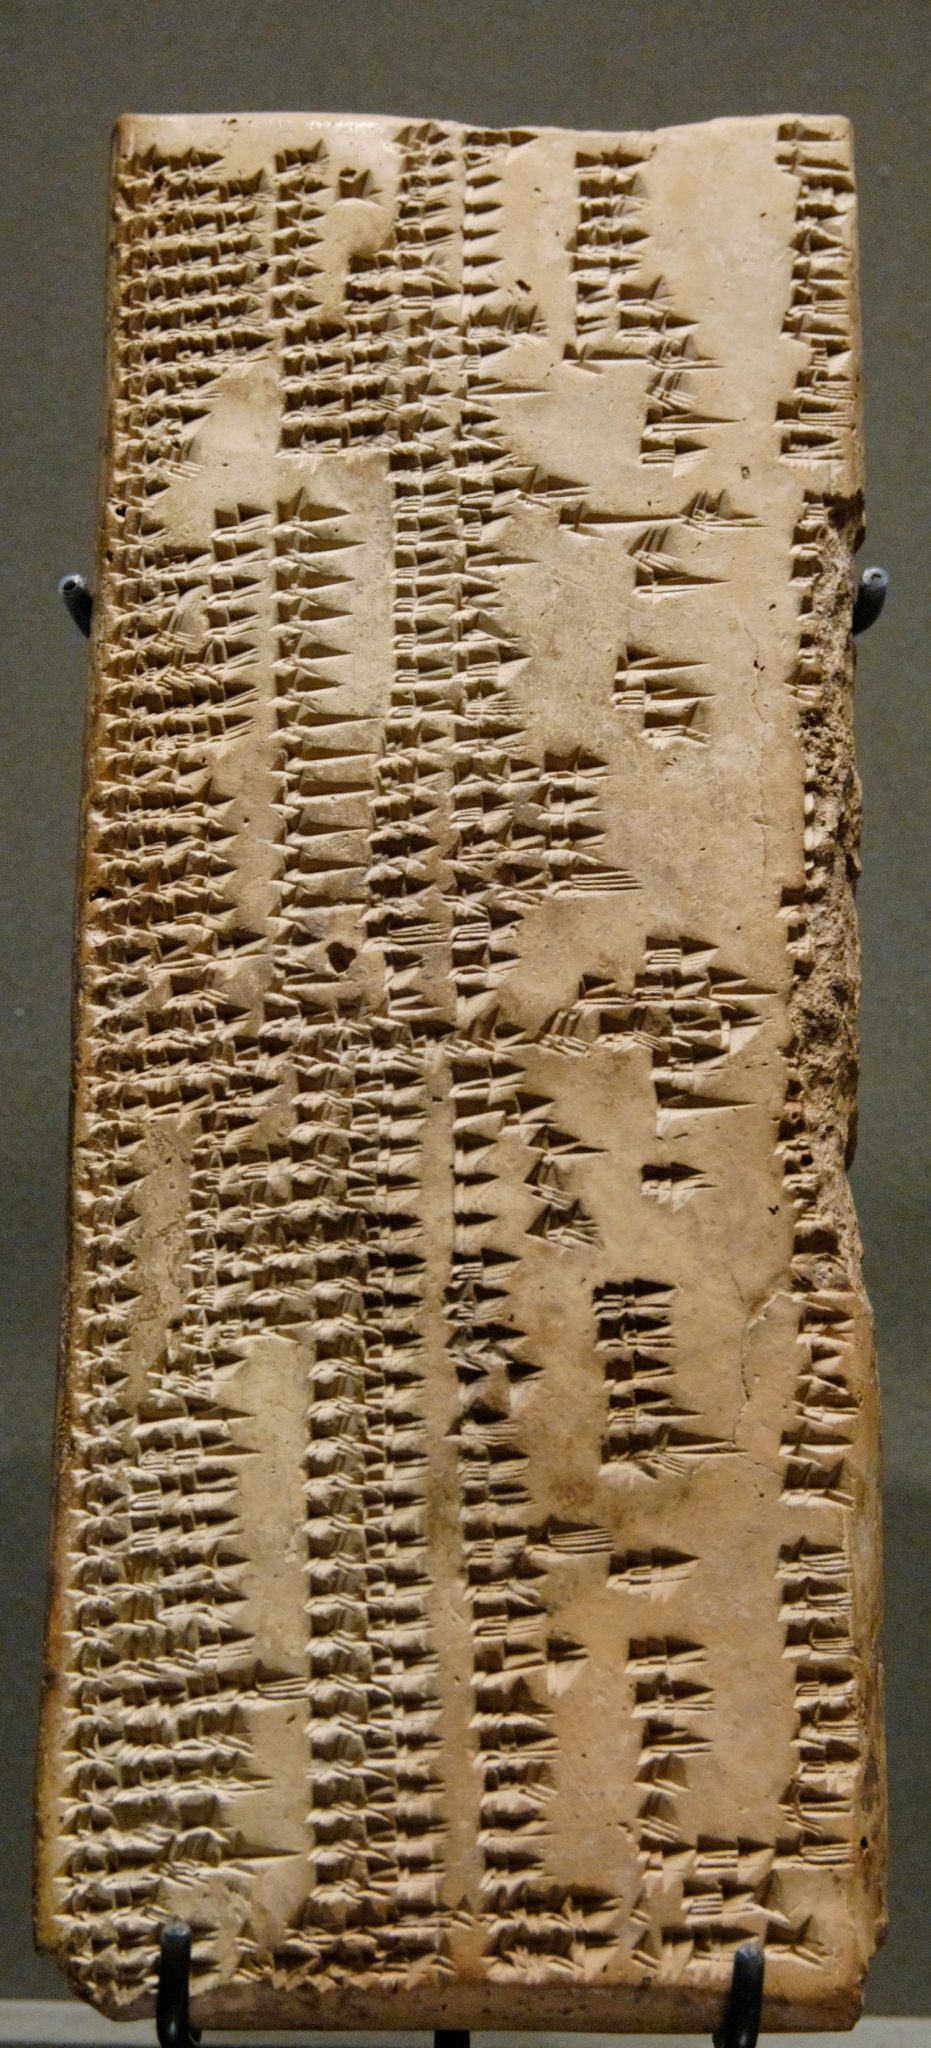 Clay tablet is in the Louvre